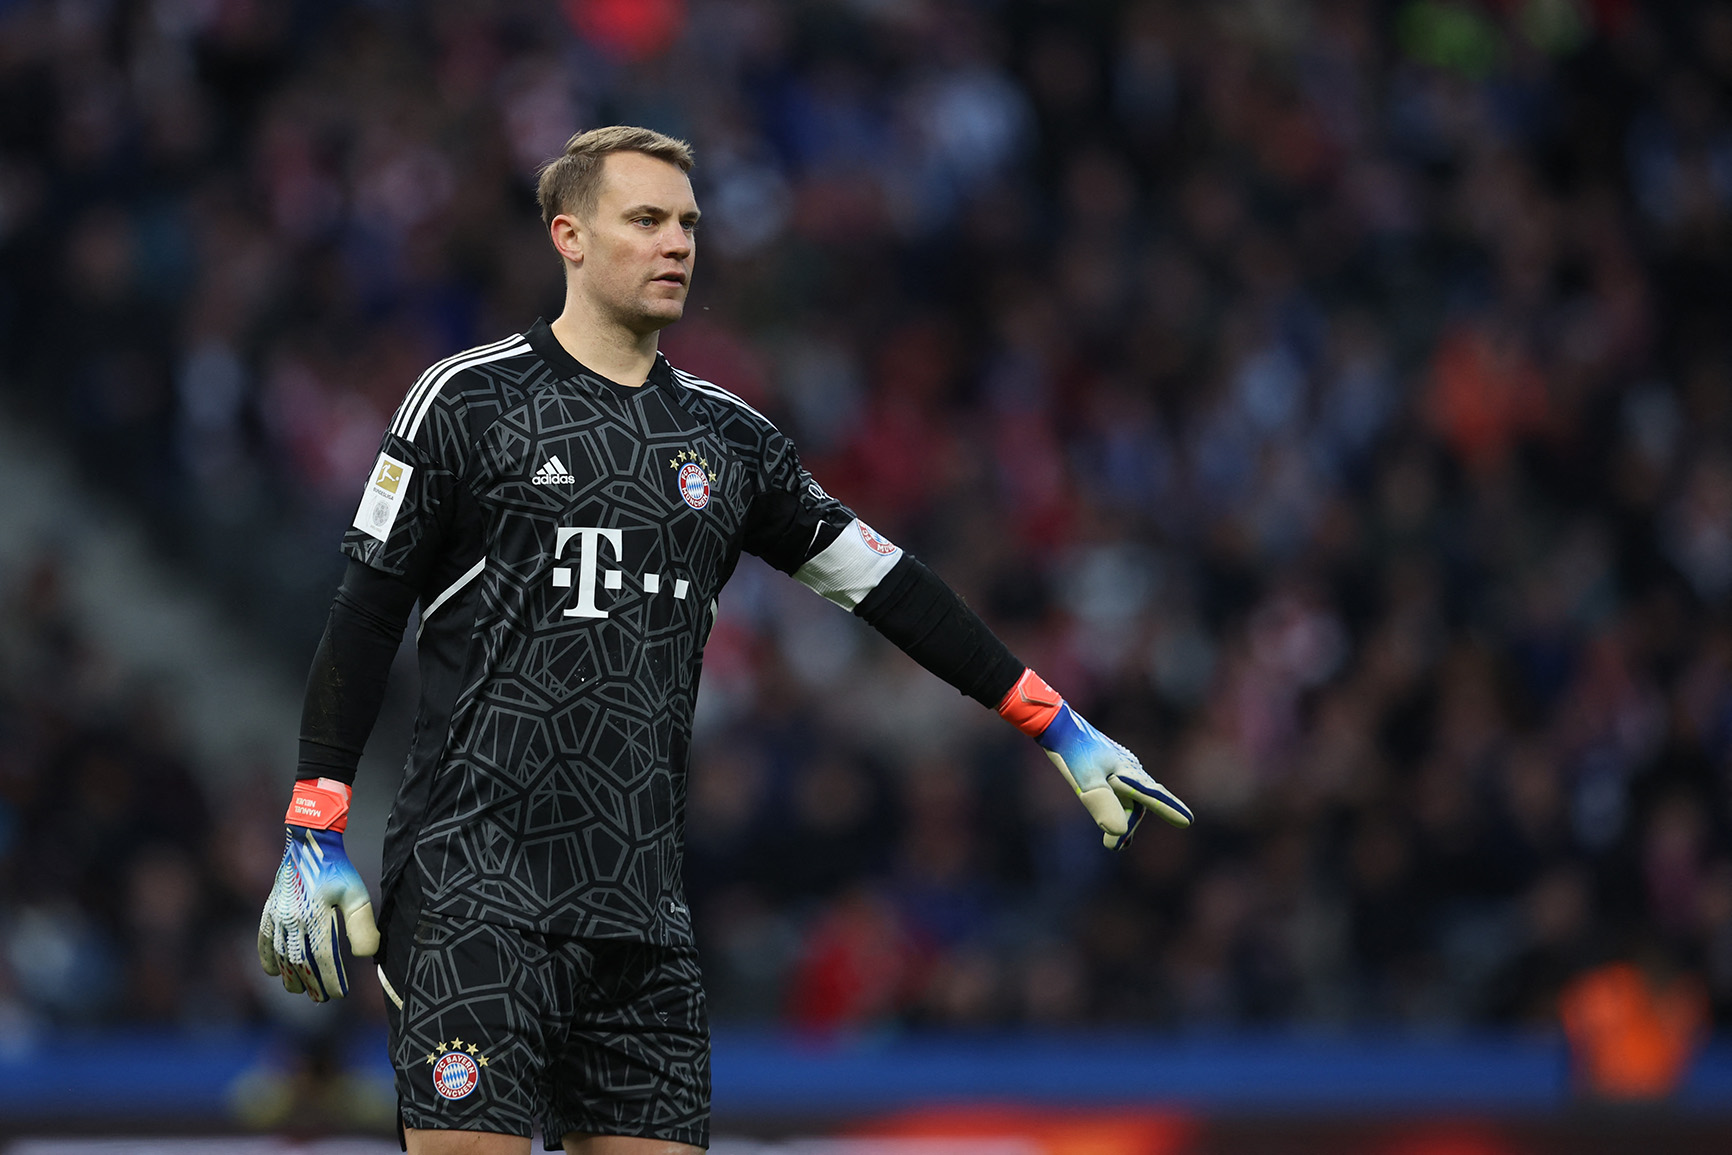 Bayern's Manuel Neuer to make comeback after year out - SportsDesk